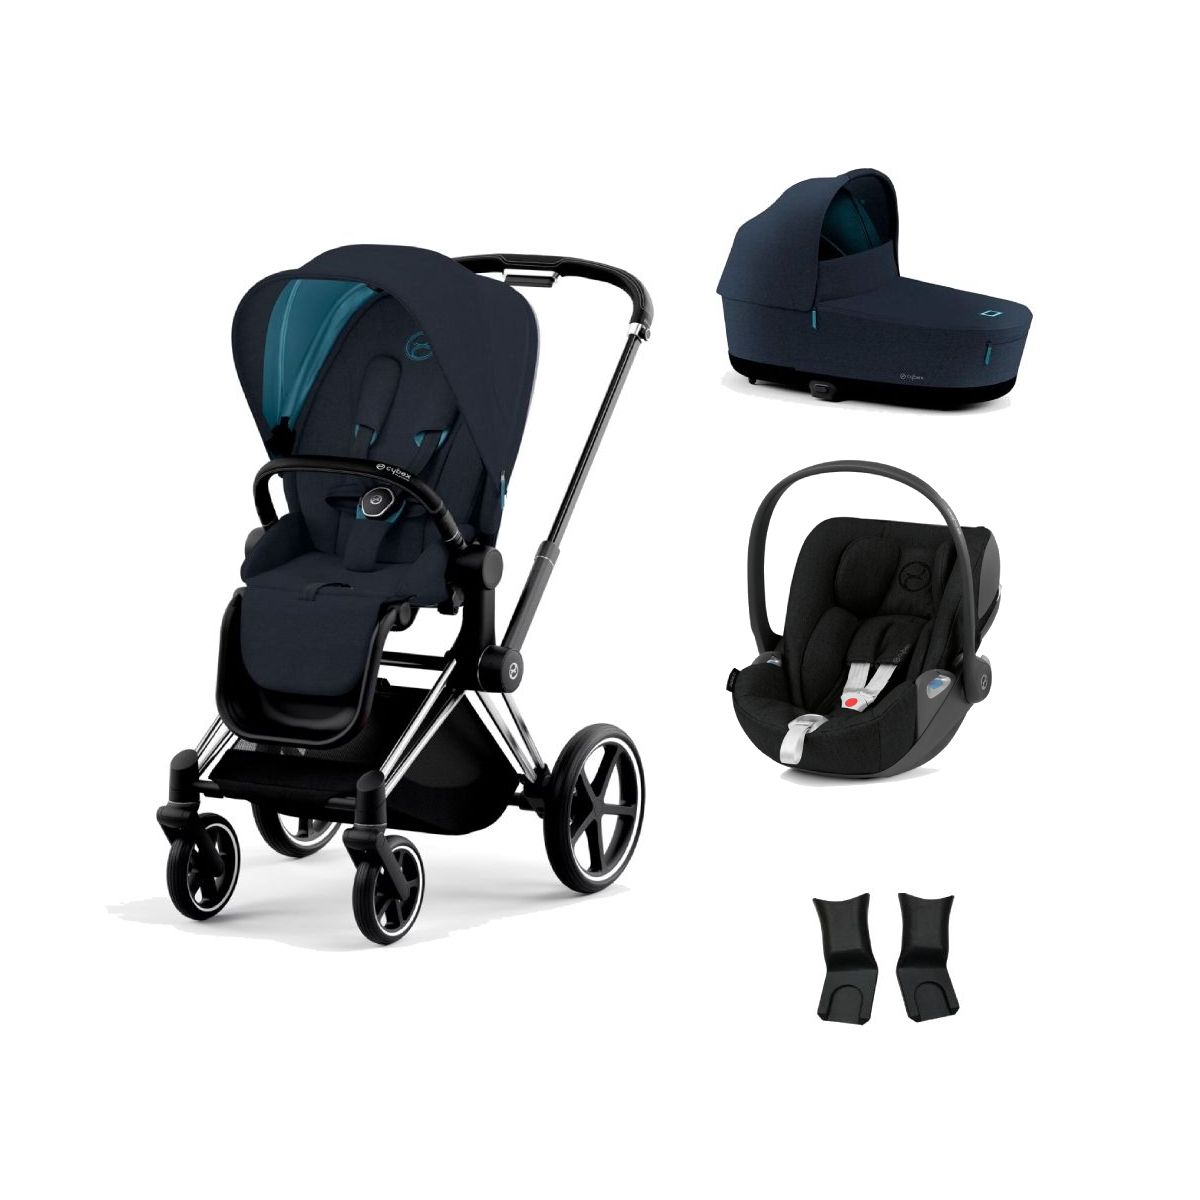 Cybex Priam Chrome Pushchair with Lux Carry Cot & Cloud Z Car Seat